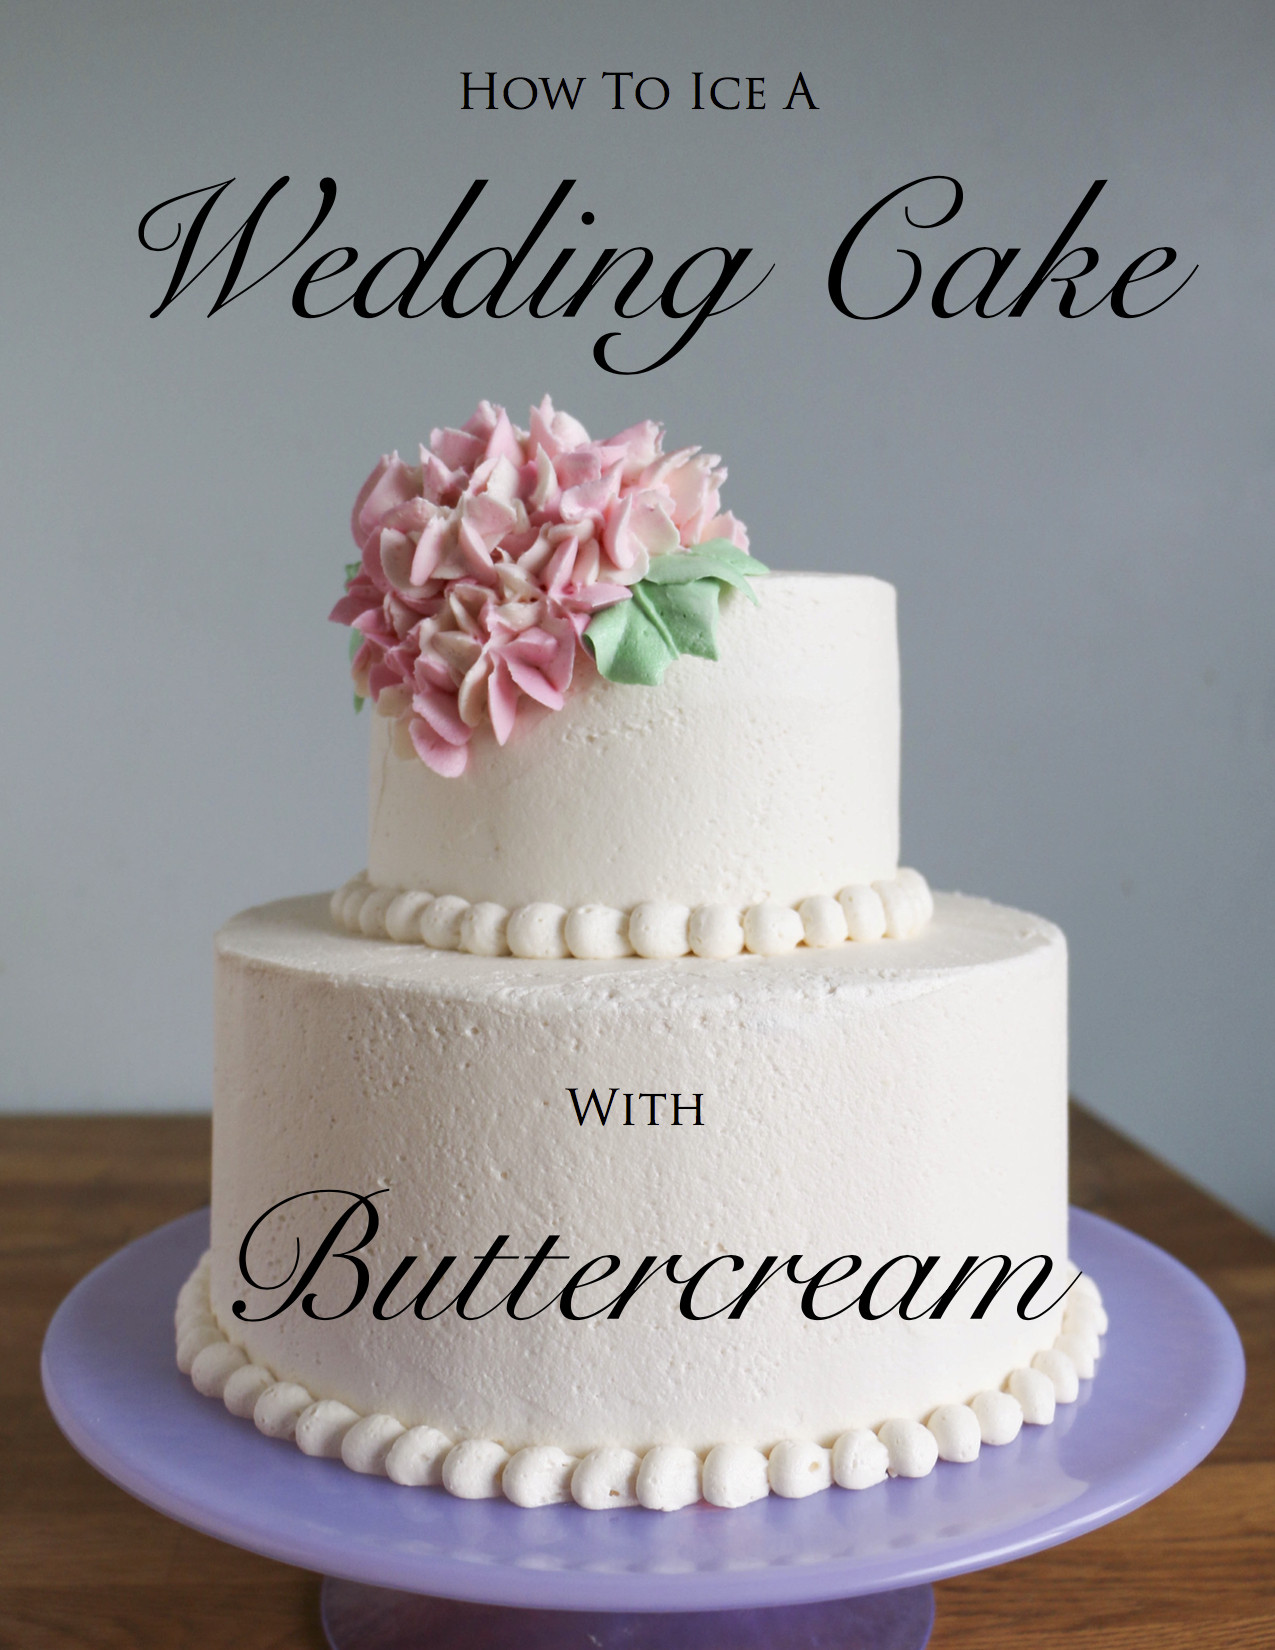 Decorating A Wedding Cake
 How to Ice a Wedding Cake With Buttercream Tutorial